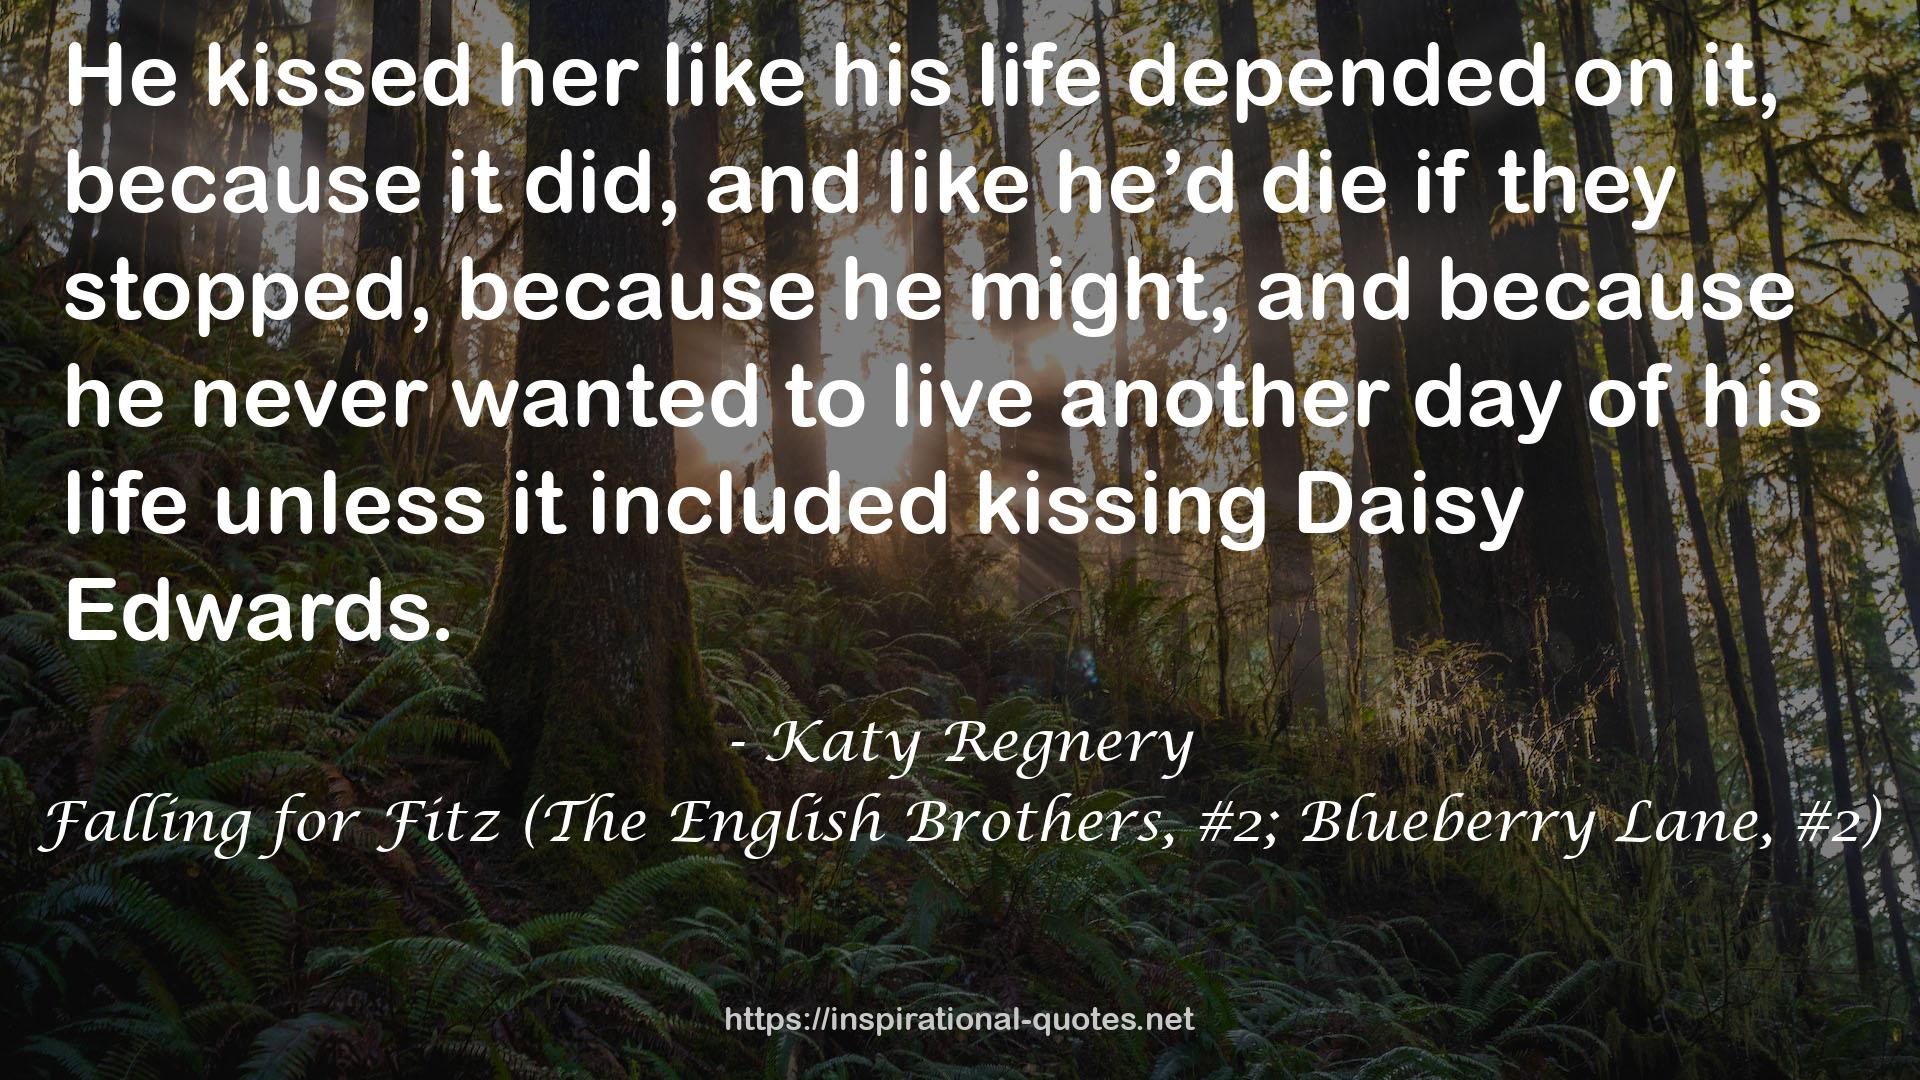 Falling for Fitz (The English Brothers, #2; Blueberry Lane, #2) QUOTES